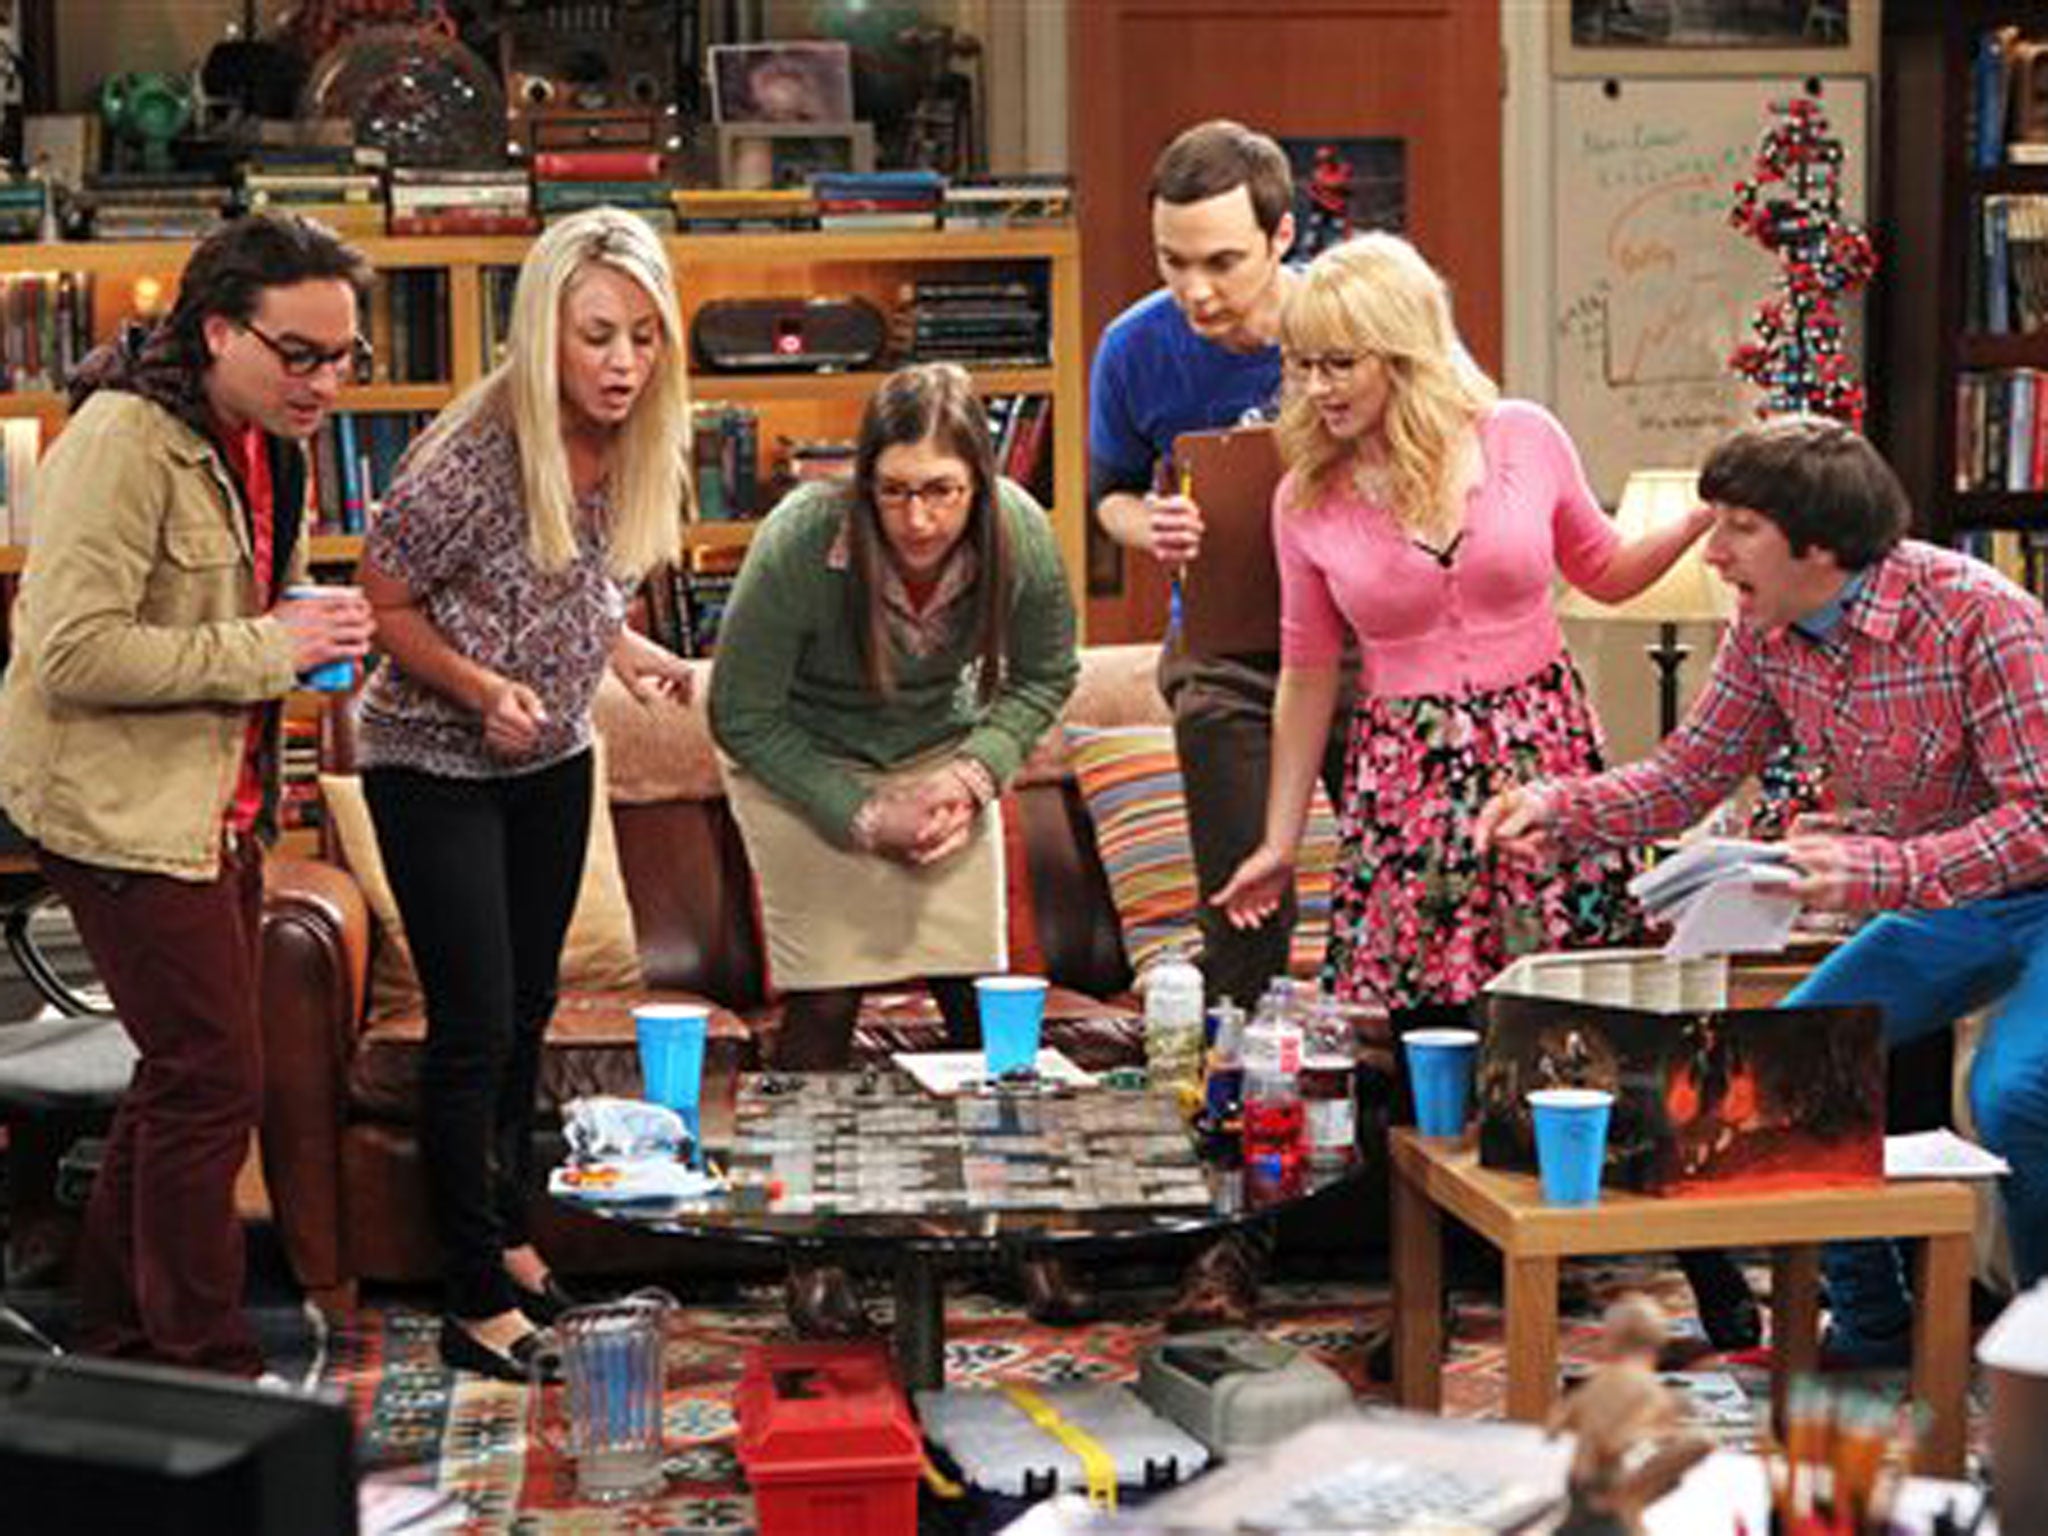 Some of the sitcom's stars are reportedly seeking up to $1m an episode